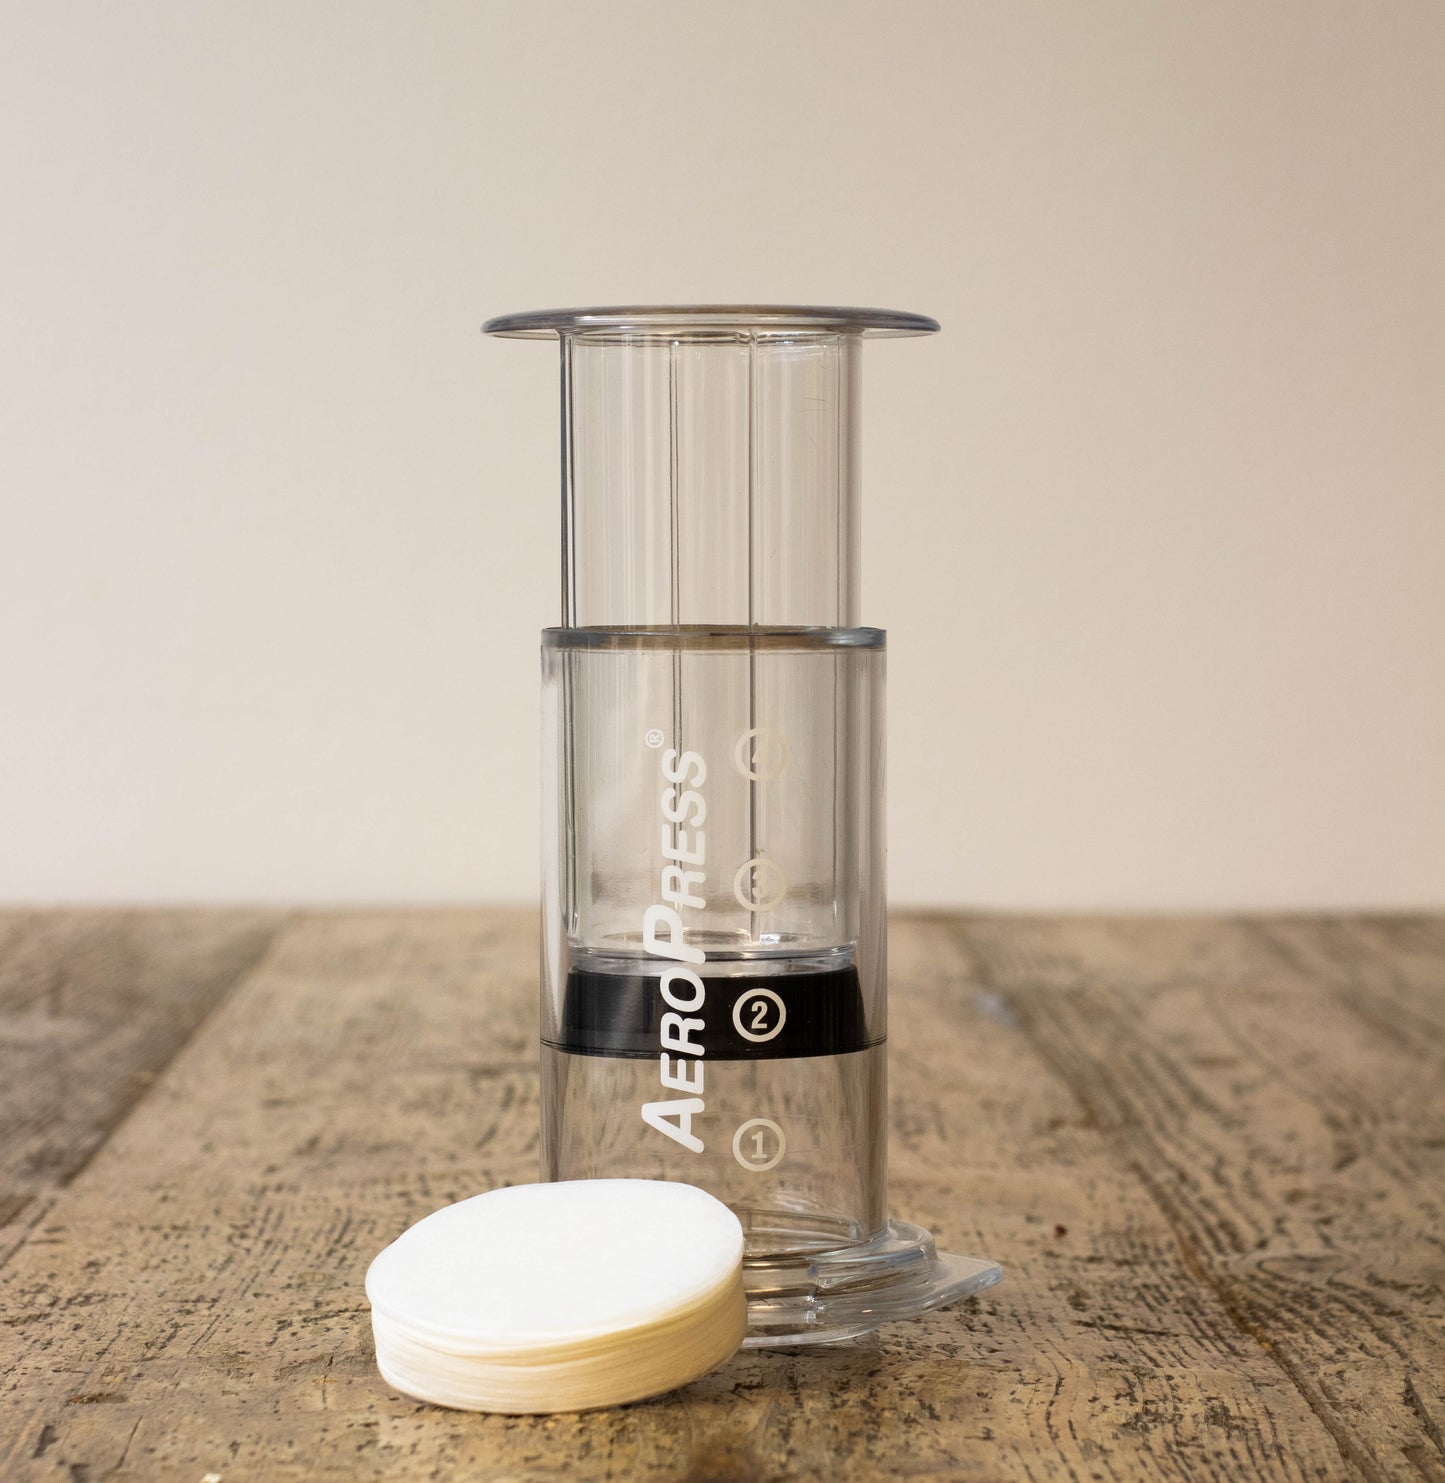 Aeropress clear set, includes filter cap with filter papers within a spoon and a stirrer